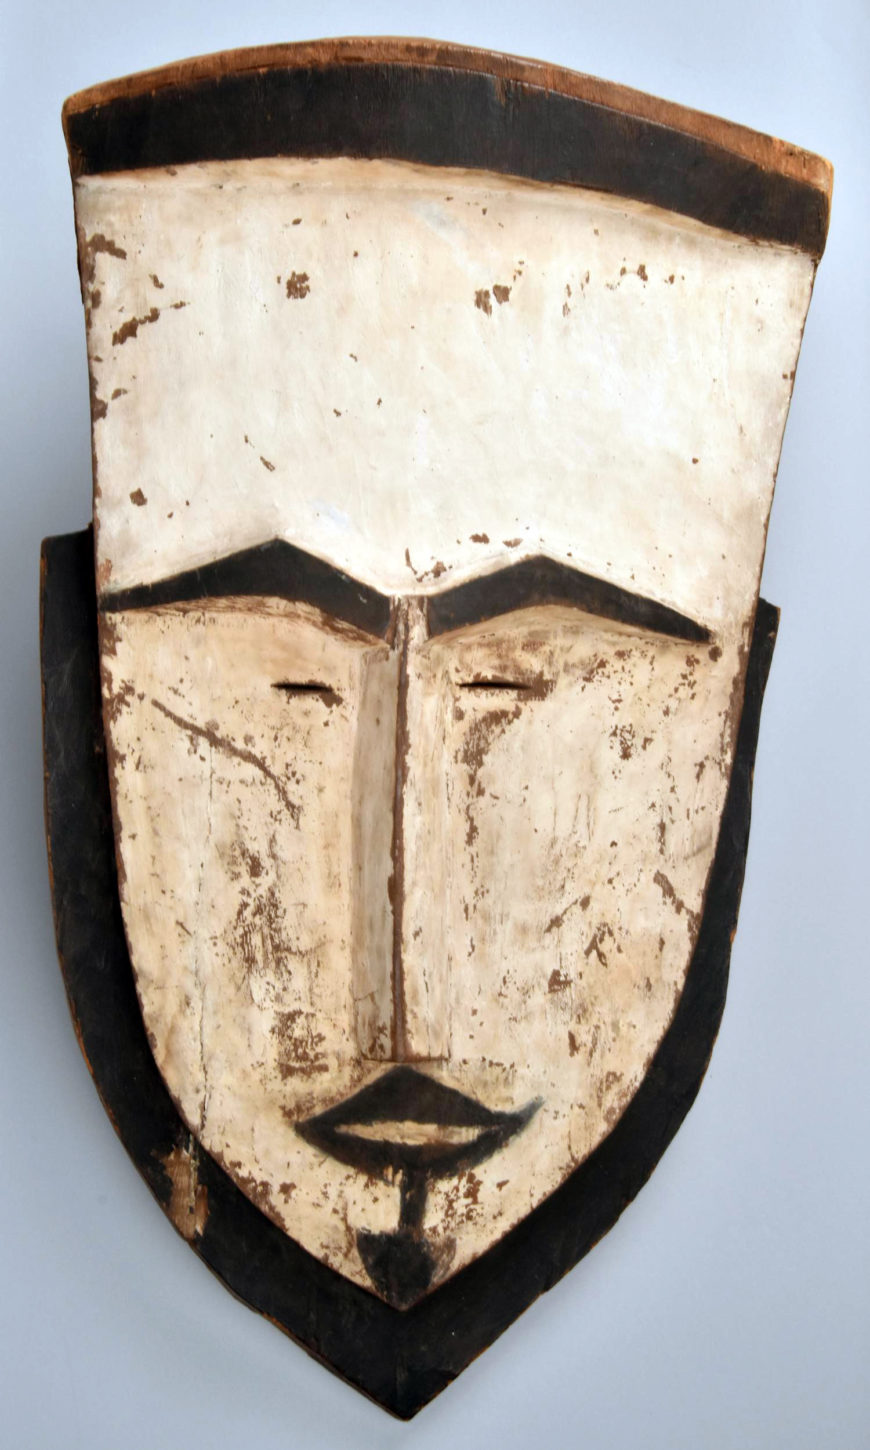 Painted mask (tapuanu) made of breadfruit wood, coconut fibre cord and natural pigments (lime and coal?), 19th century, Caroline Islands, from the Satawan Atoll, 65 x 36 cm (© Trustees of the British Museum)